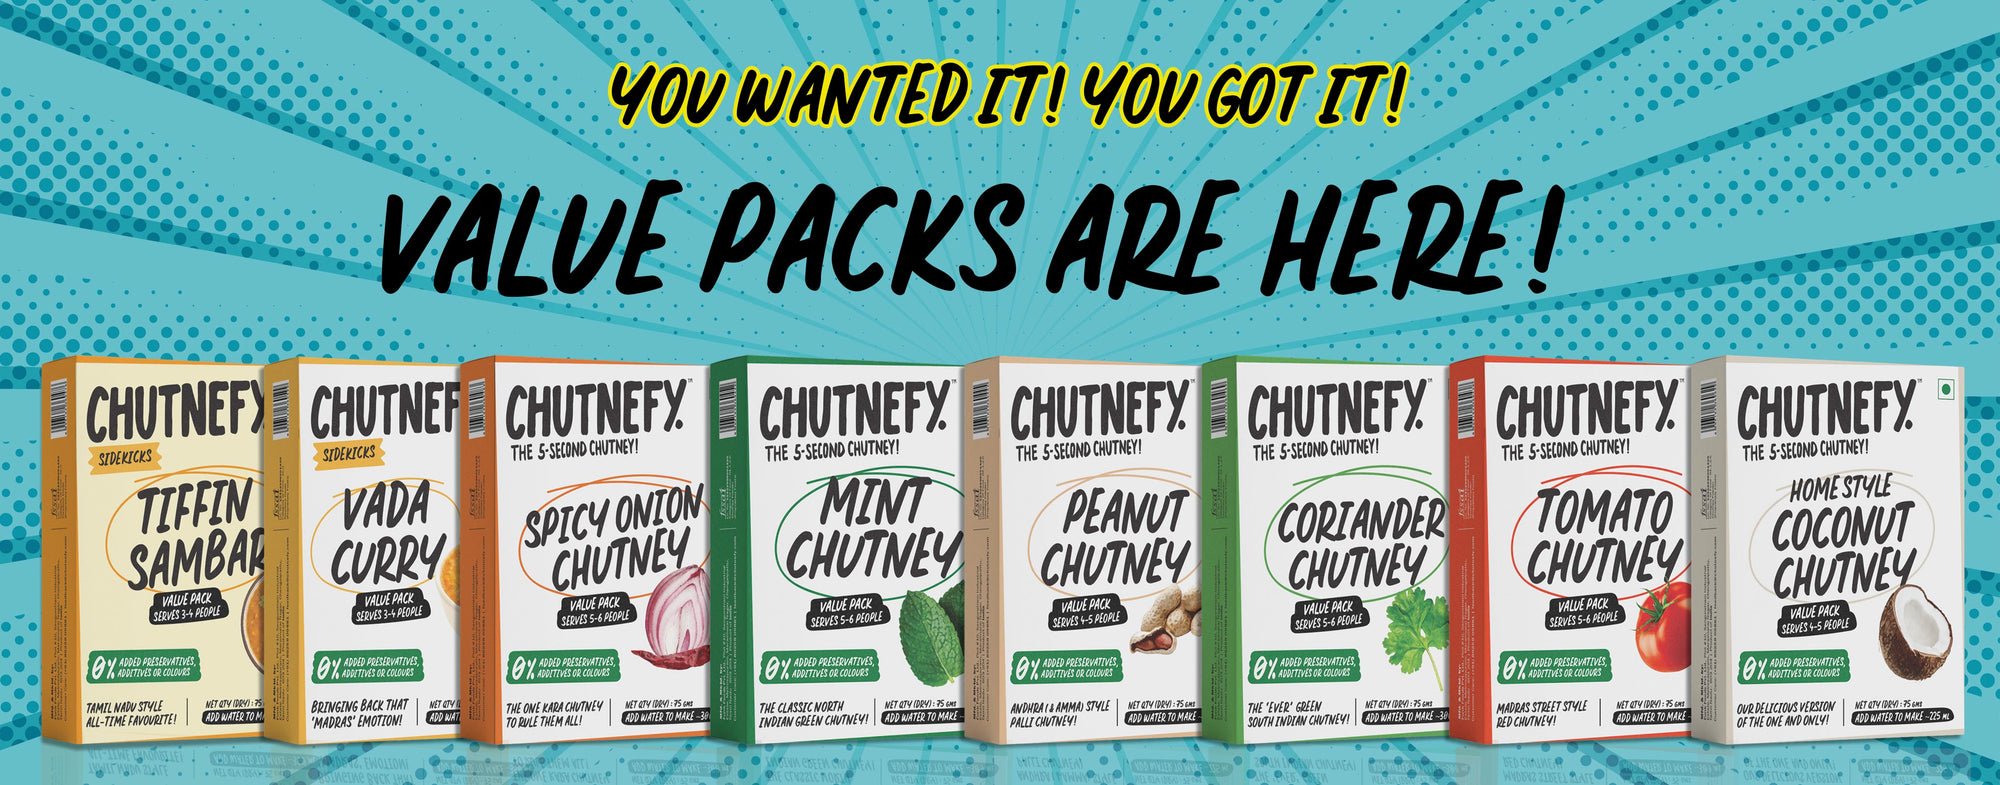 YOU WANT IT ! YOU GOT IT ! VALUE PACK ARE HERE!